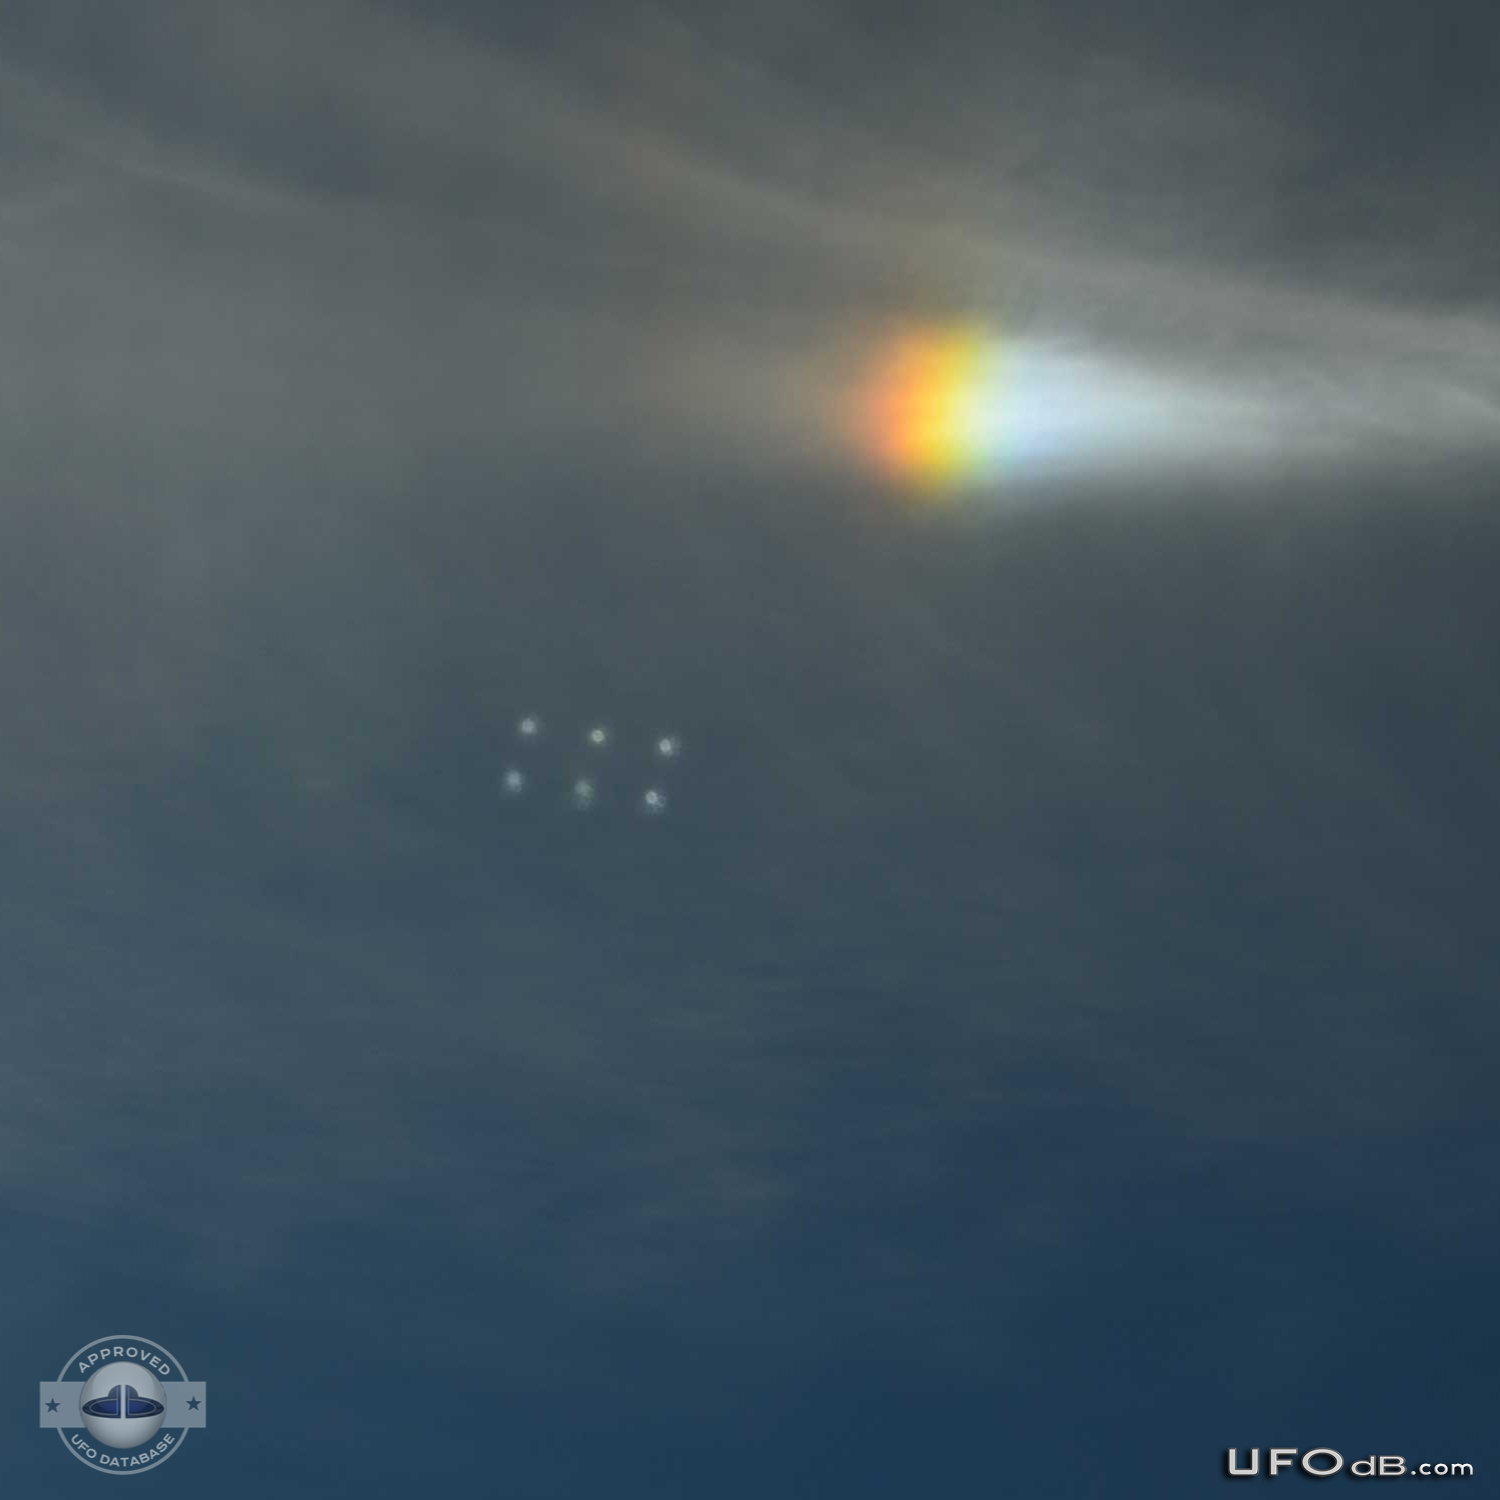 Pictures shot from bus reveals six ufos in a rectangle formation UFO Picture #383-1